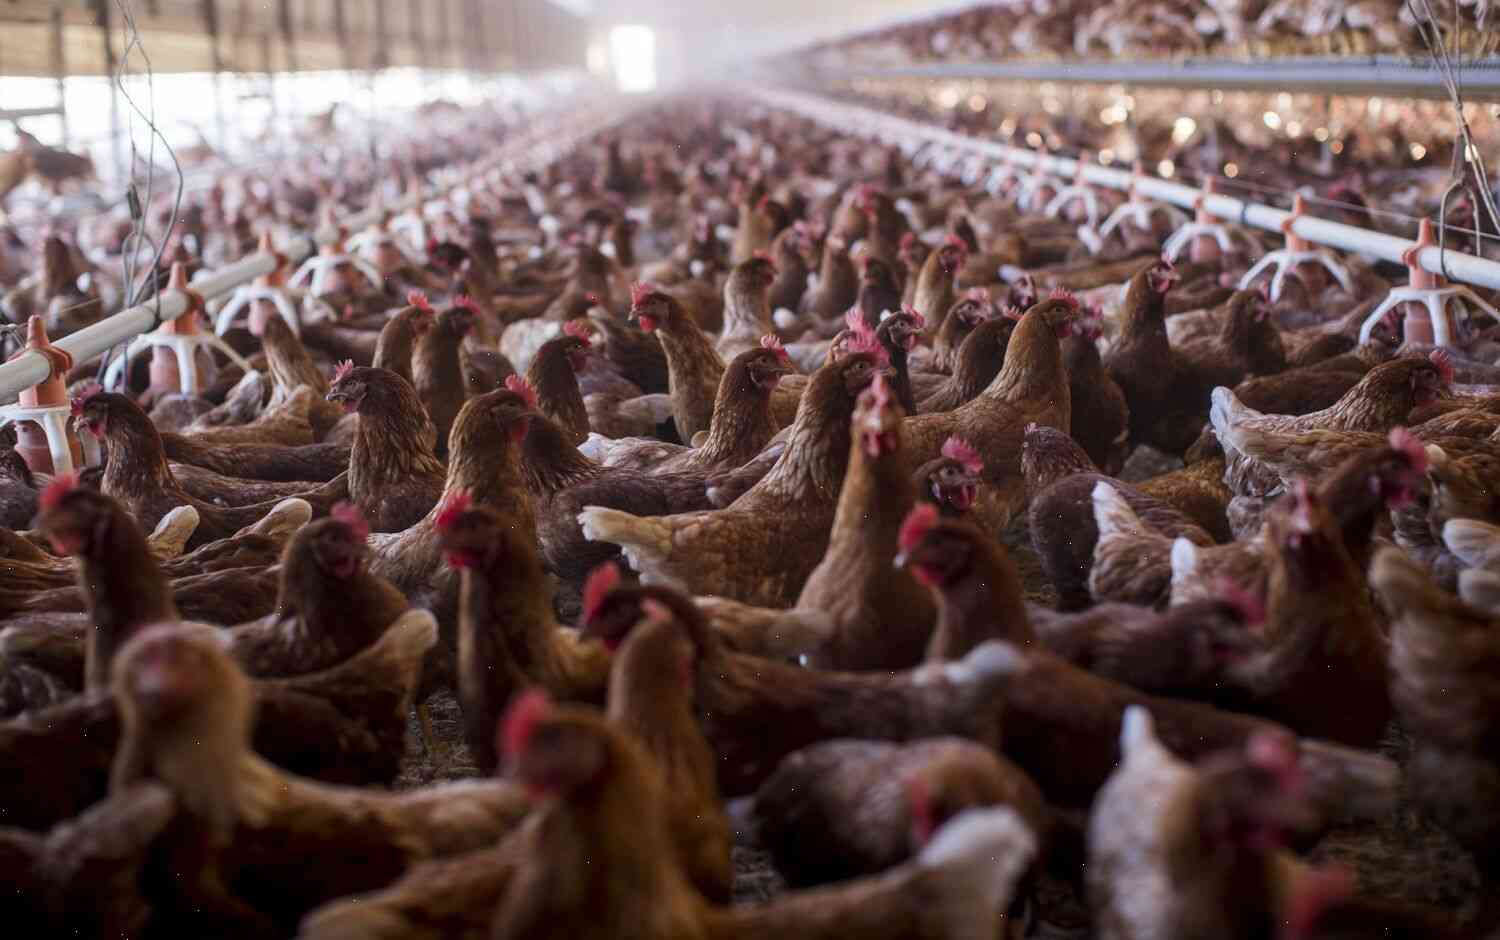 The first confirmed case of the H5N1 virus in Southern California is confirmed